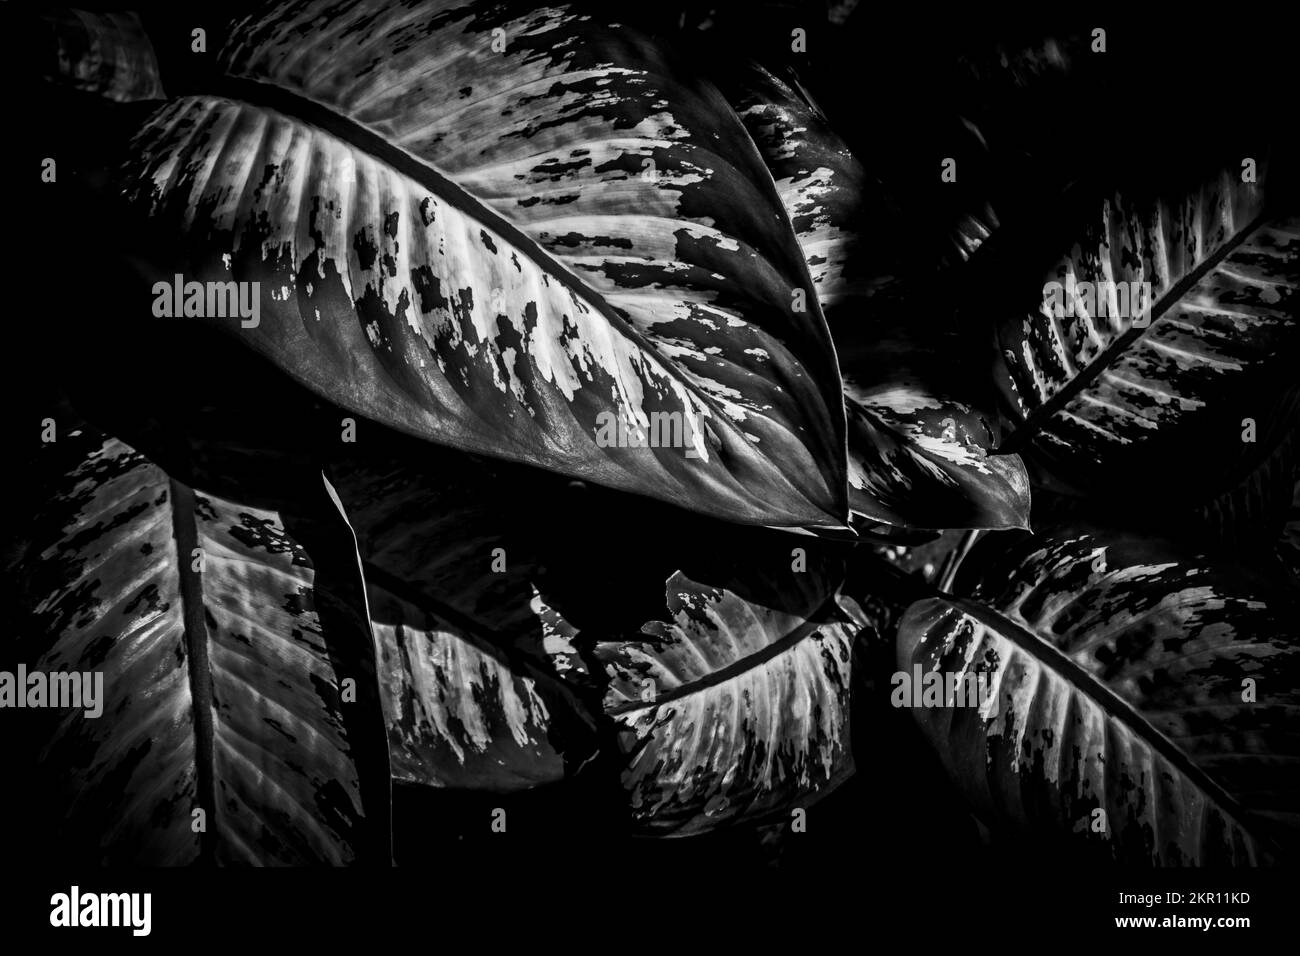 Dark scene in rainforest dynamics with tropical leaves shaded in botanical black Stock Photo